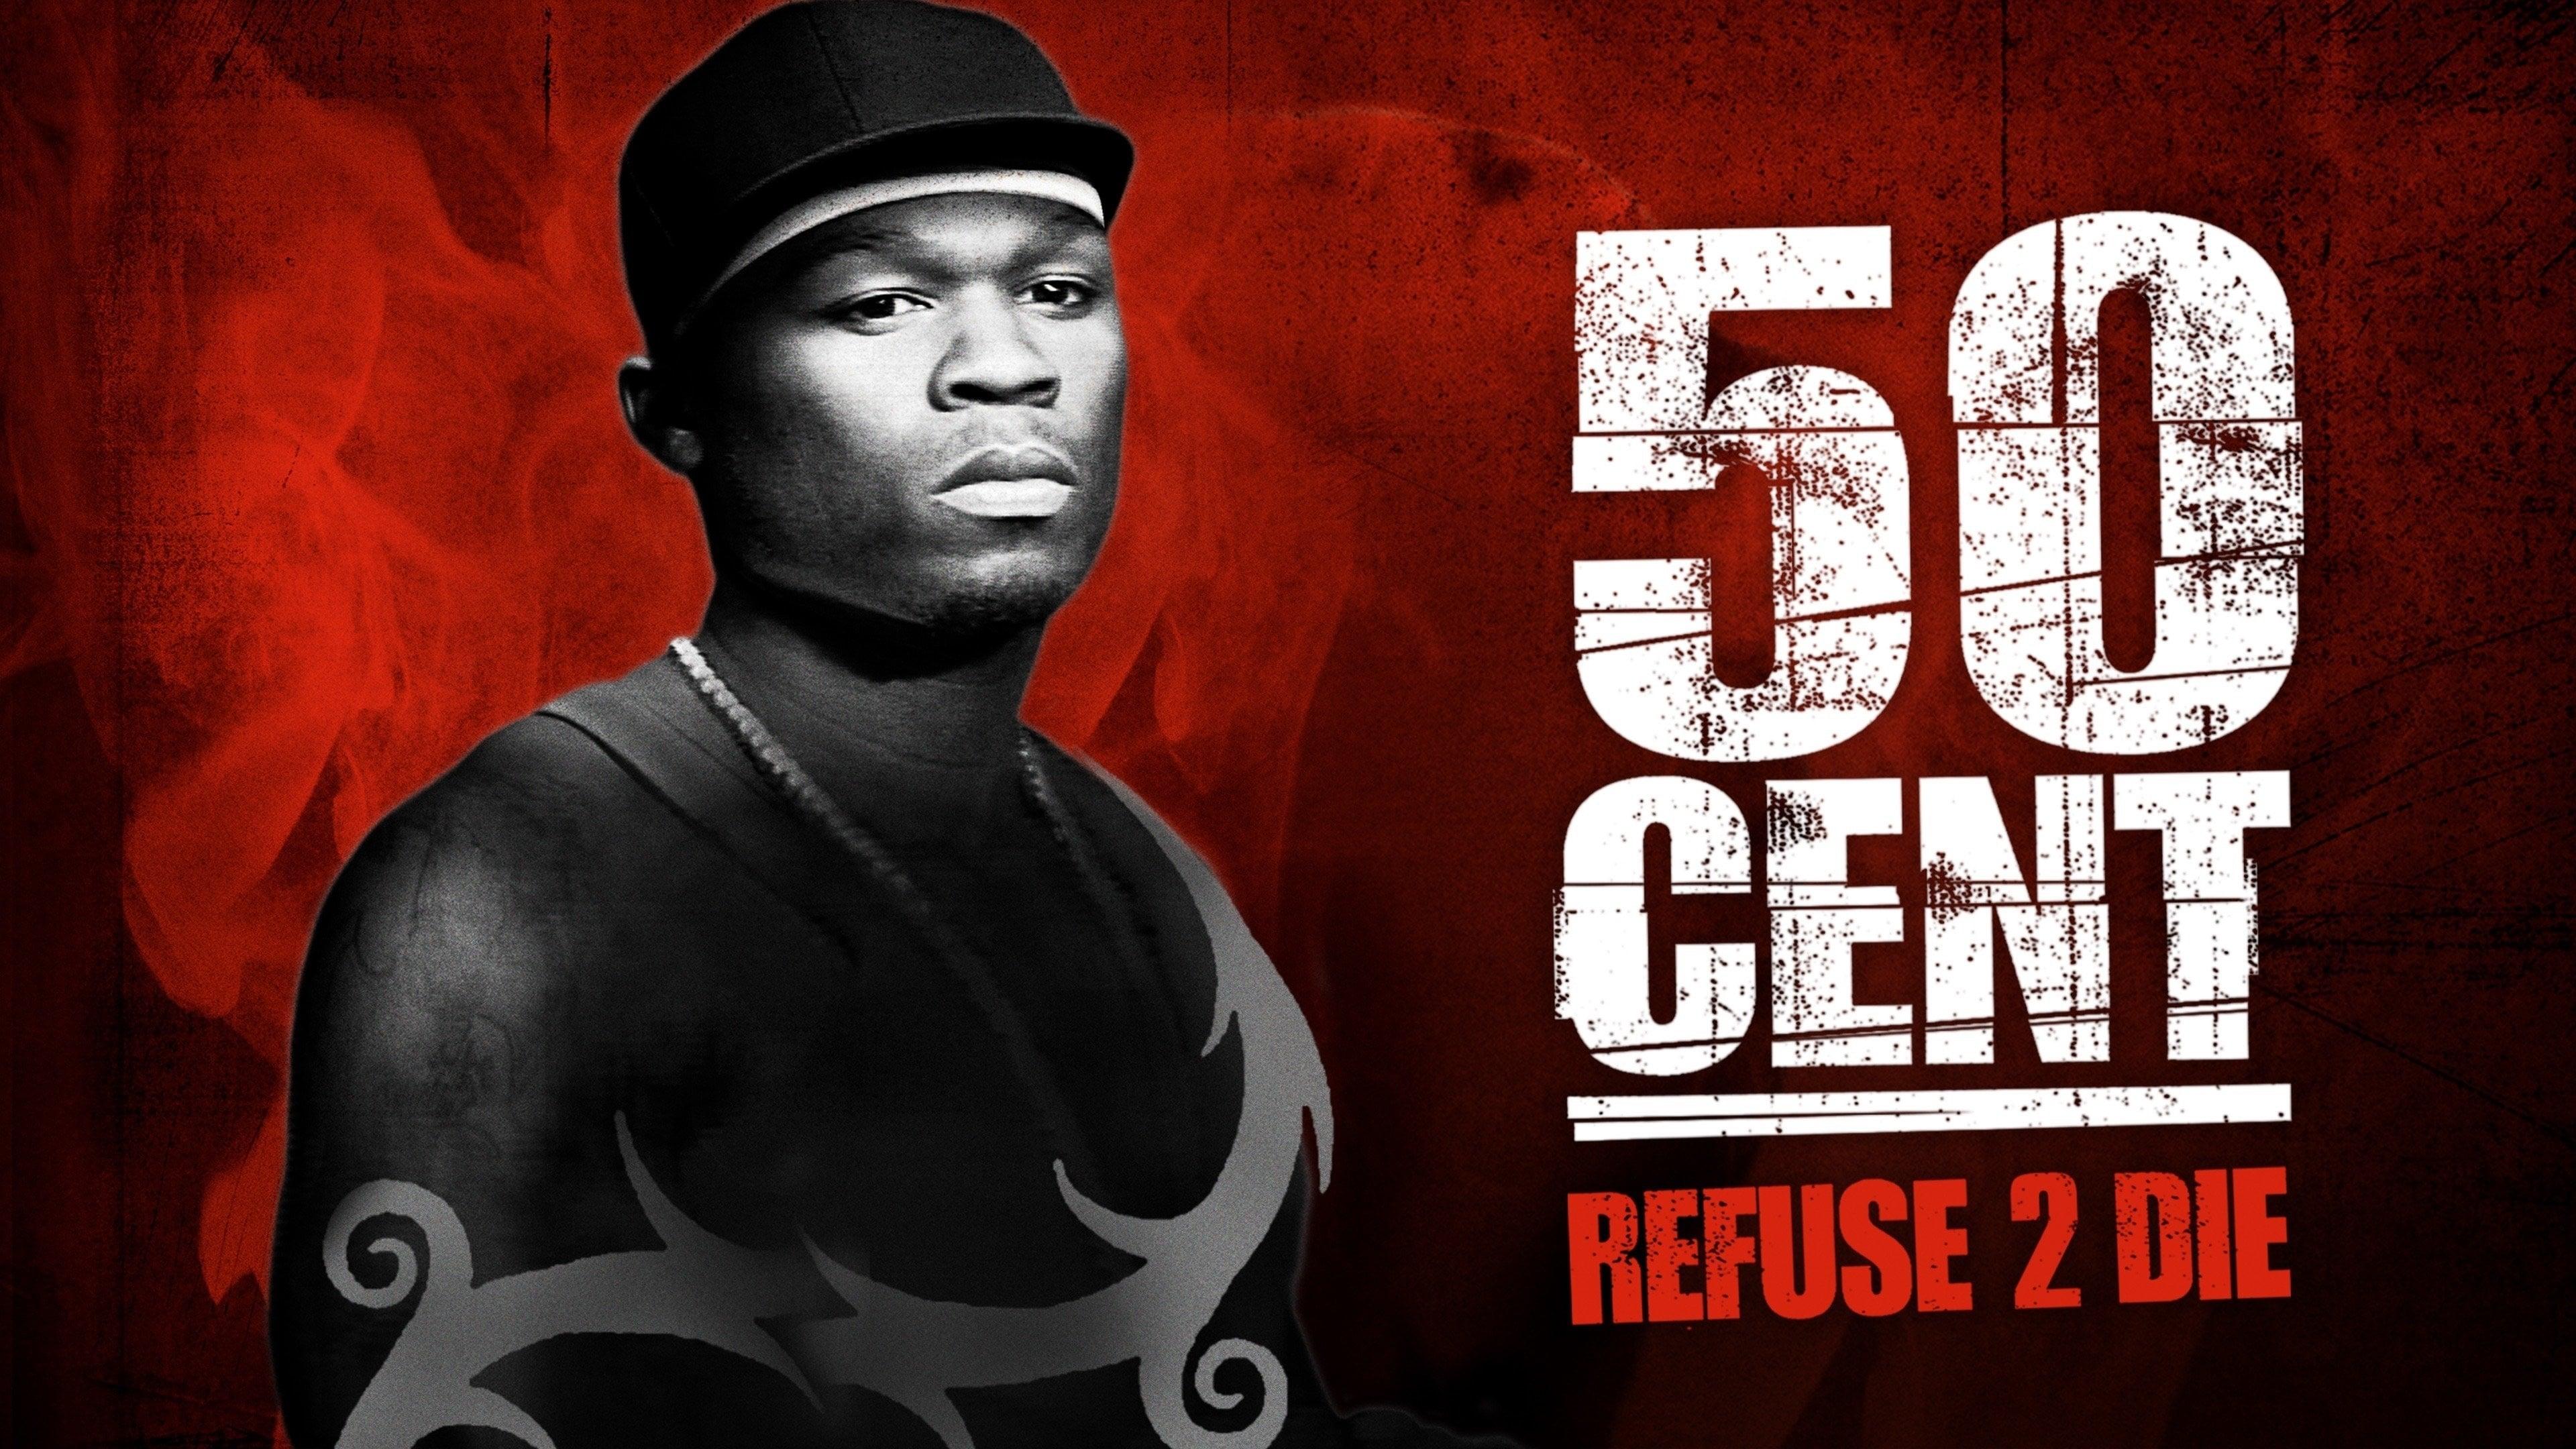 50 Cent: Refuse 2 Die backdrop